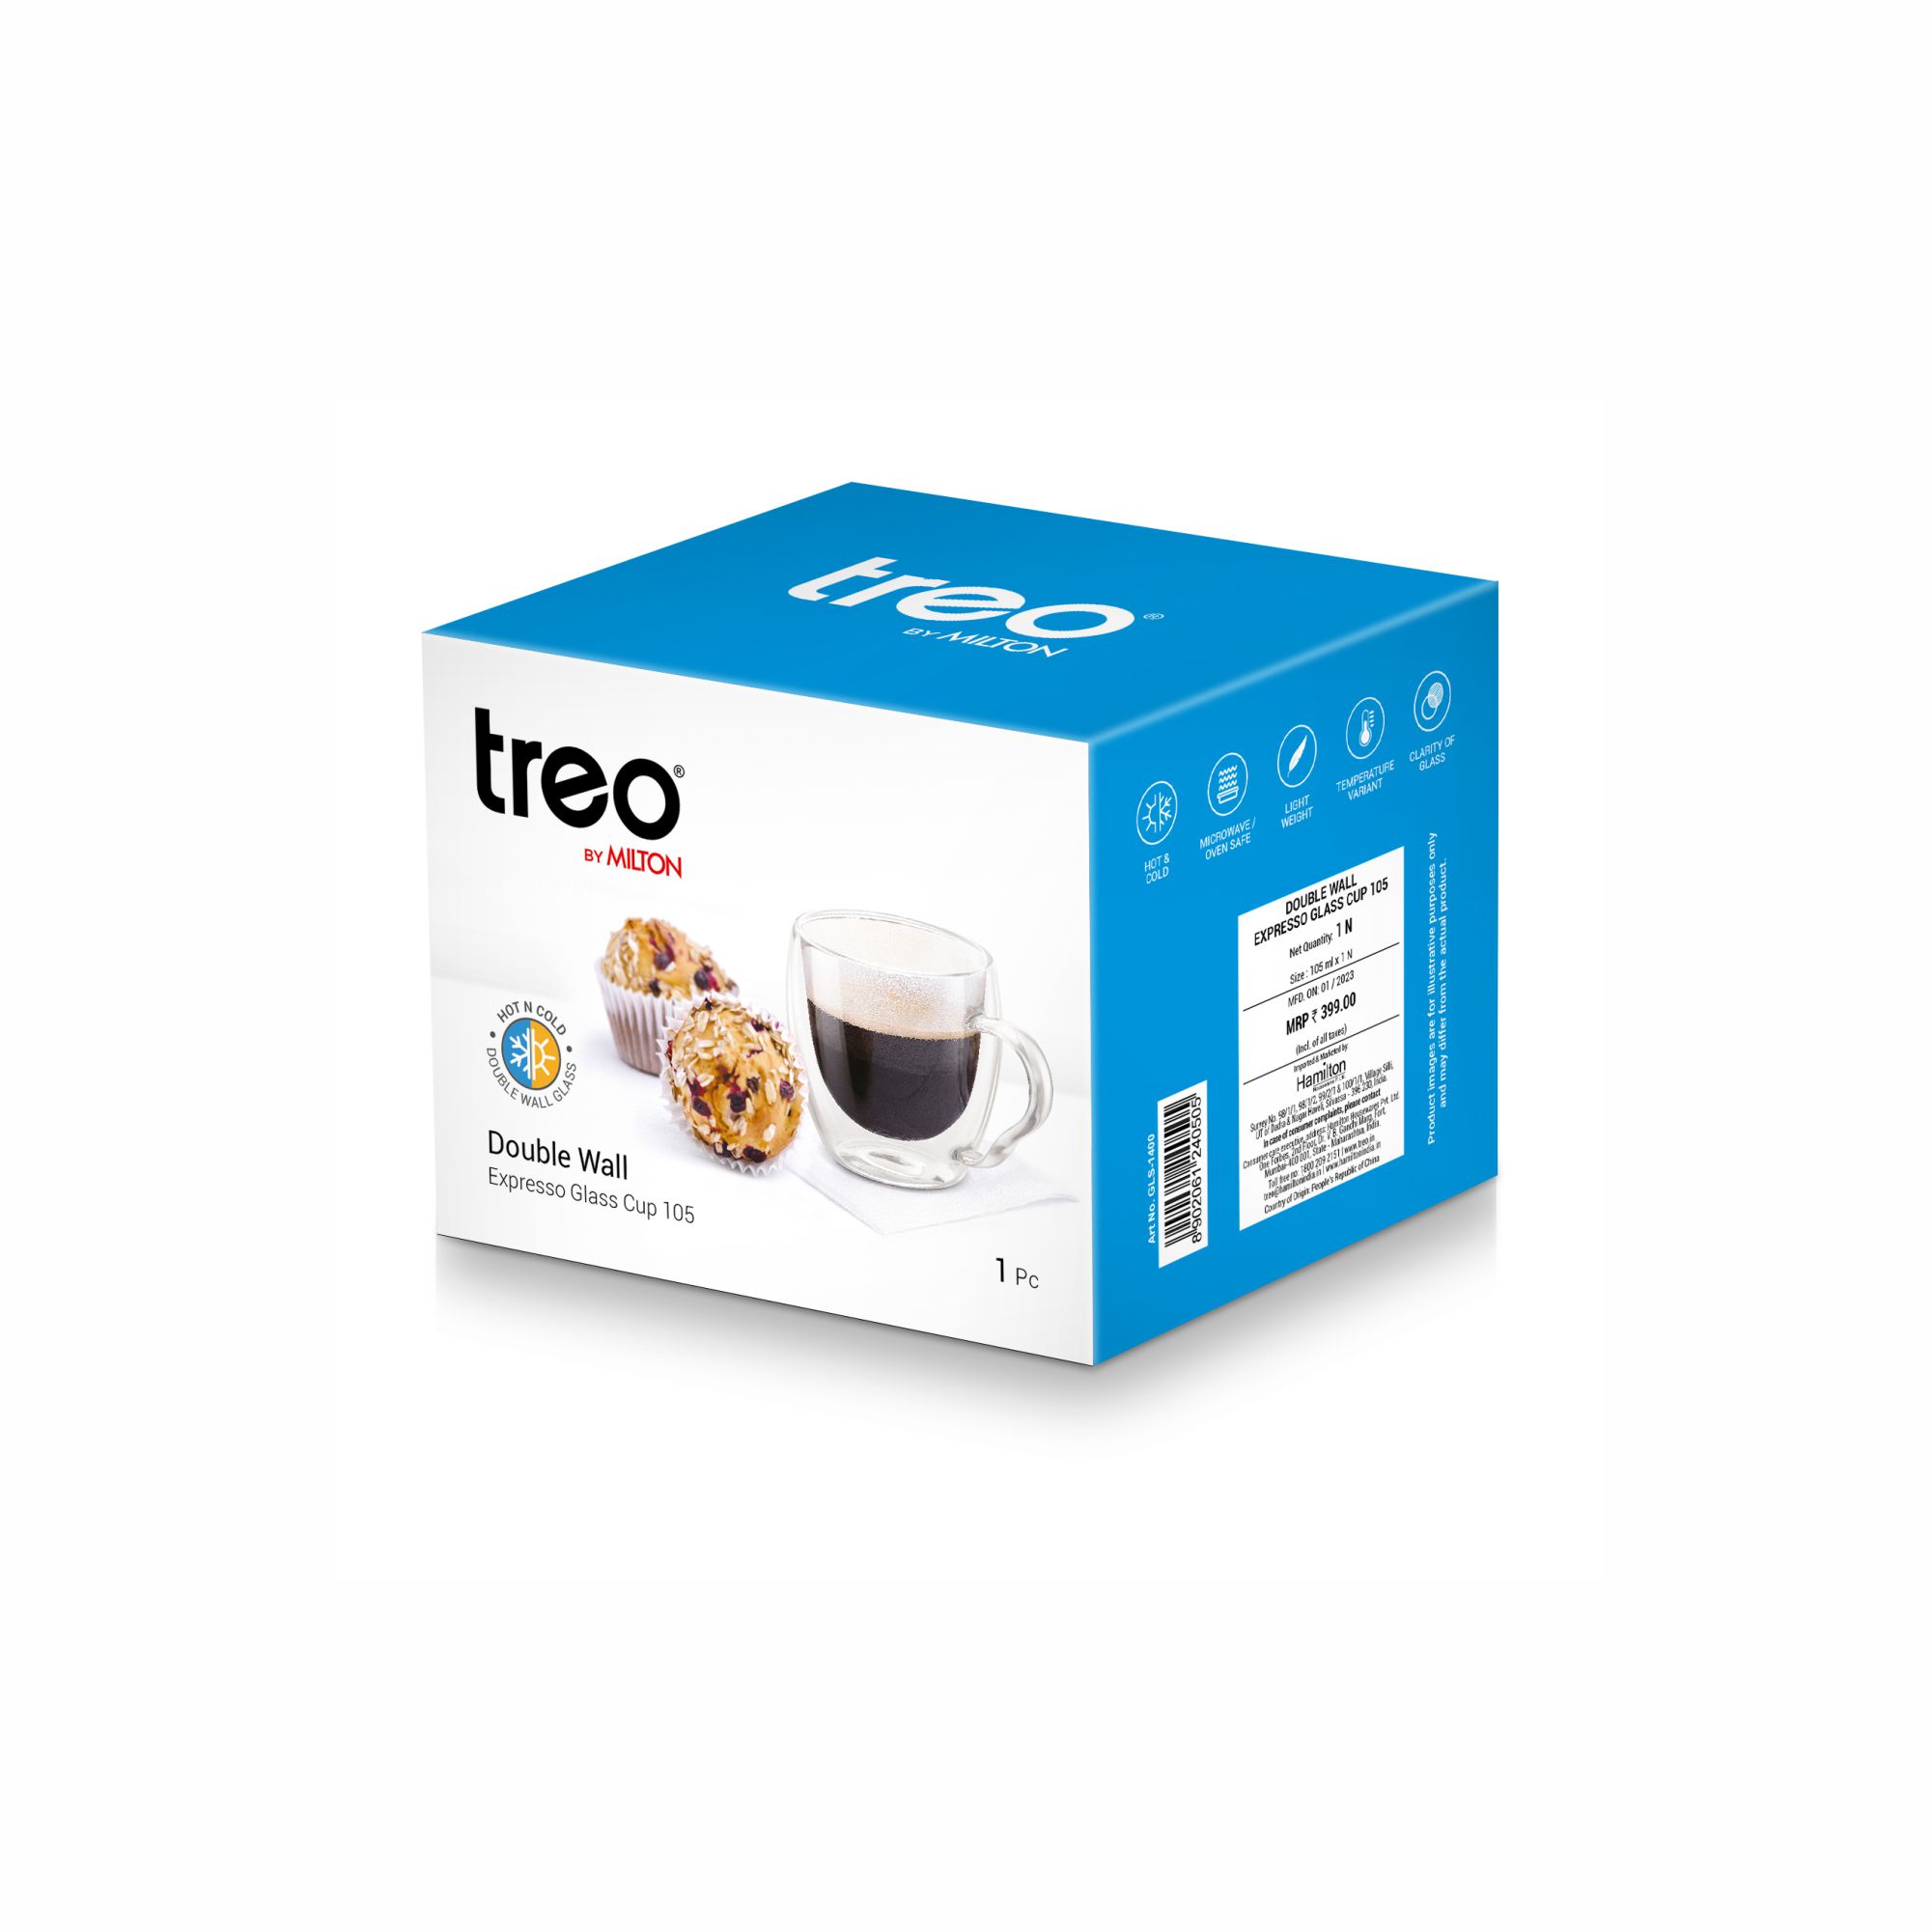 Treo Double Wall Espresso Glass Cup